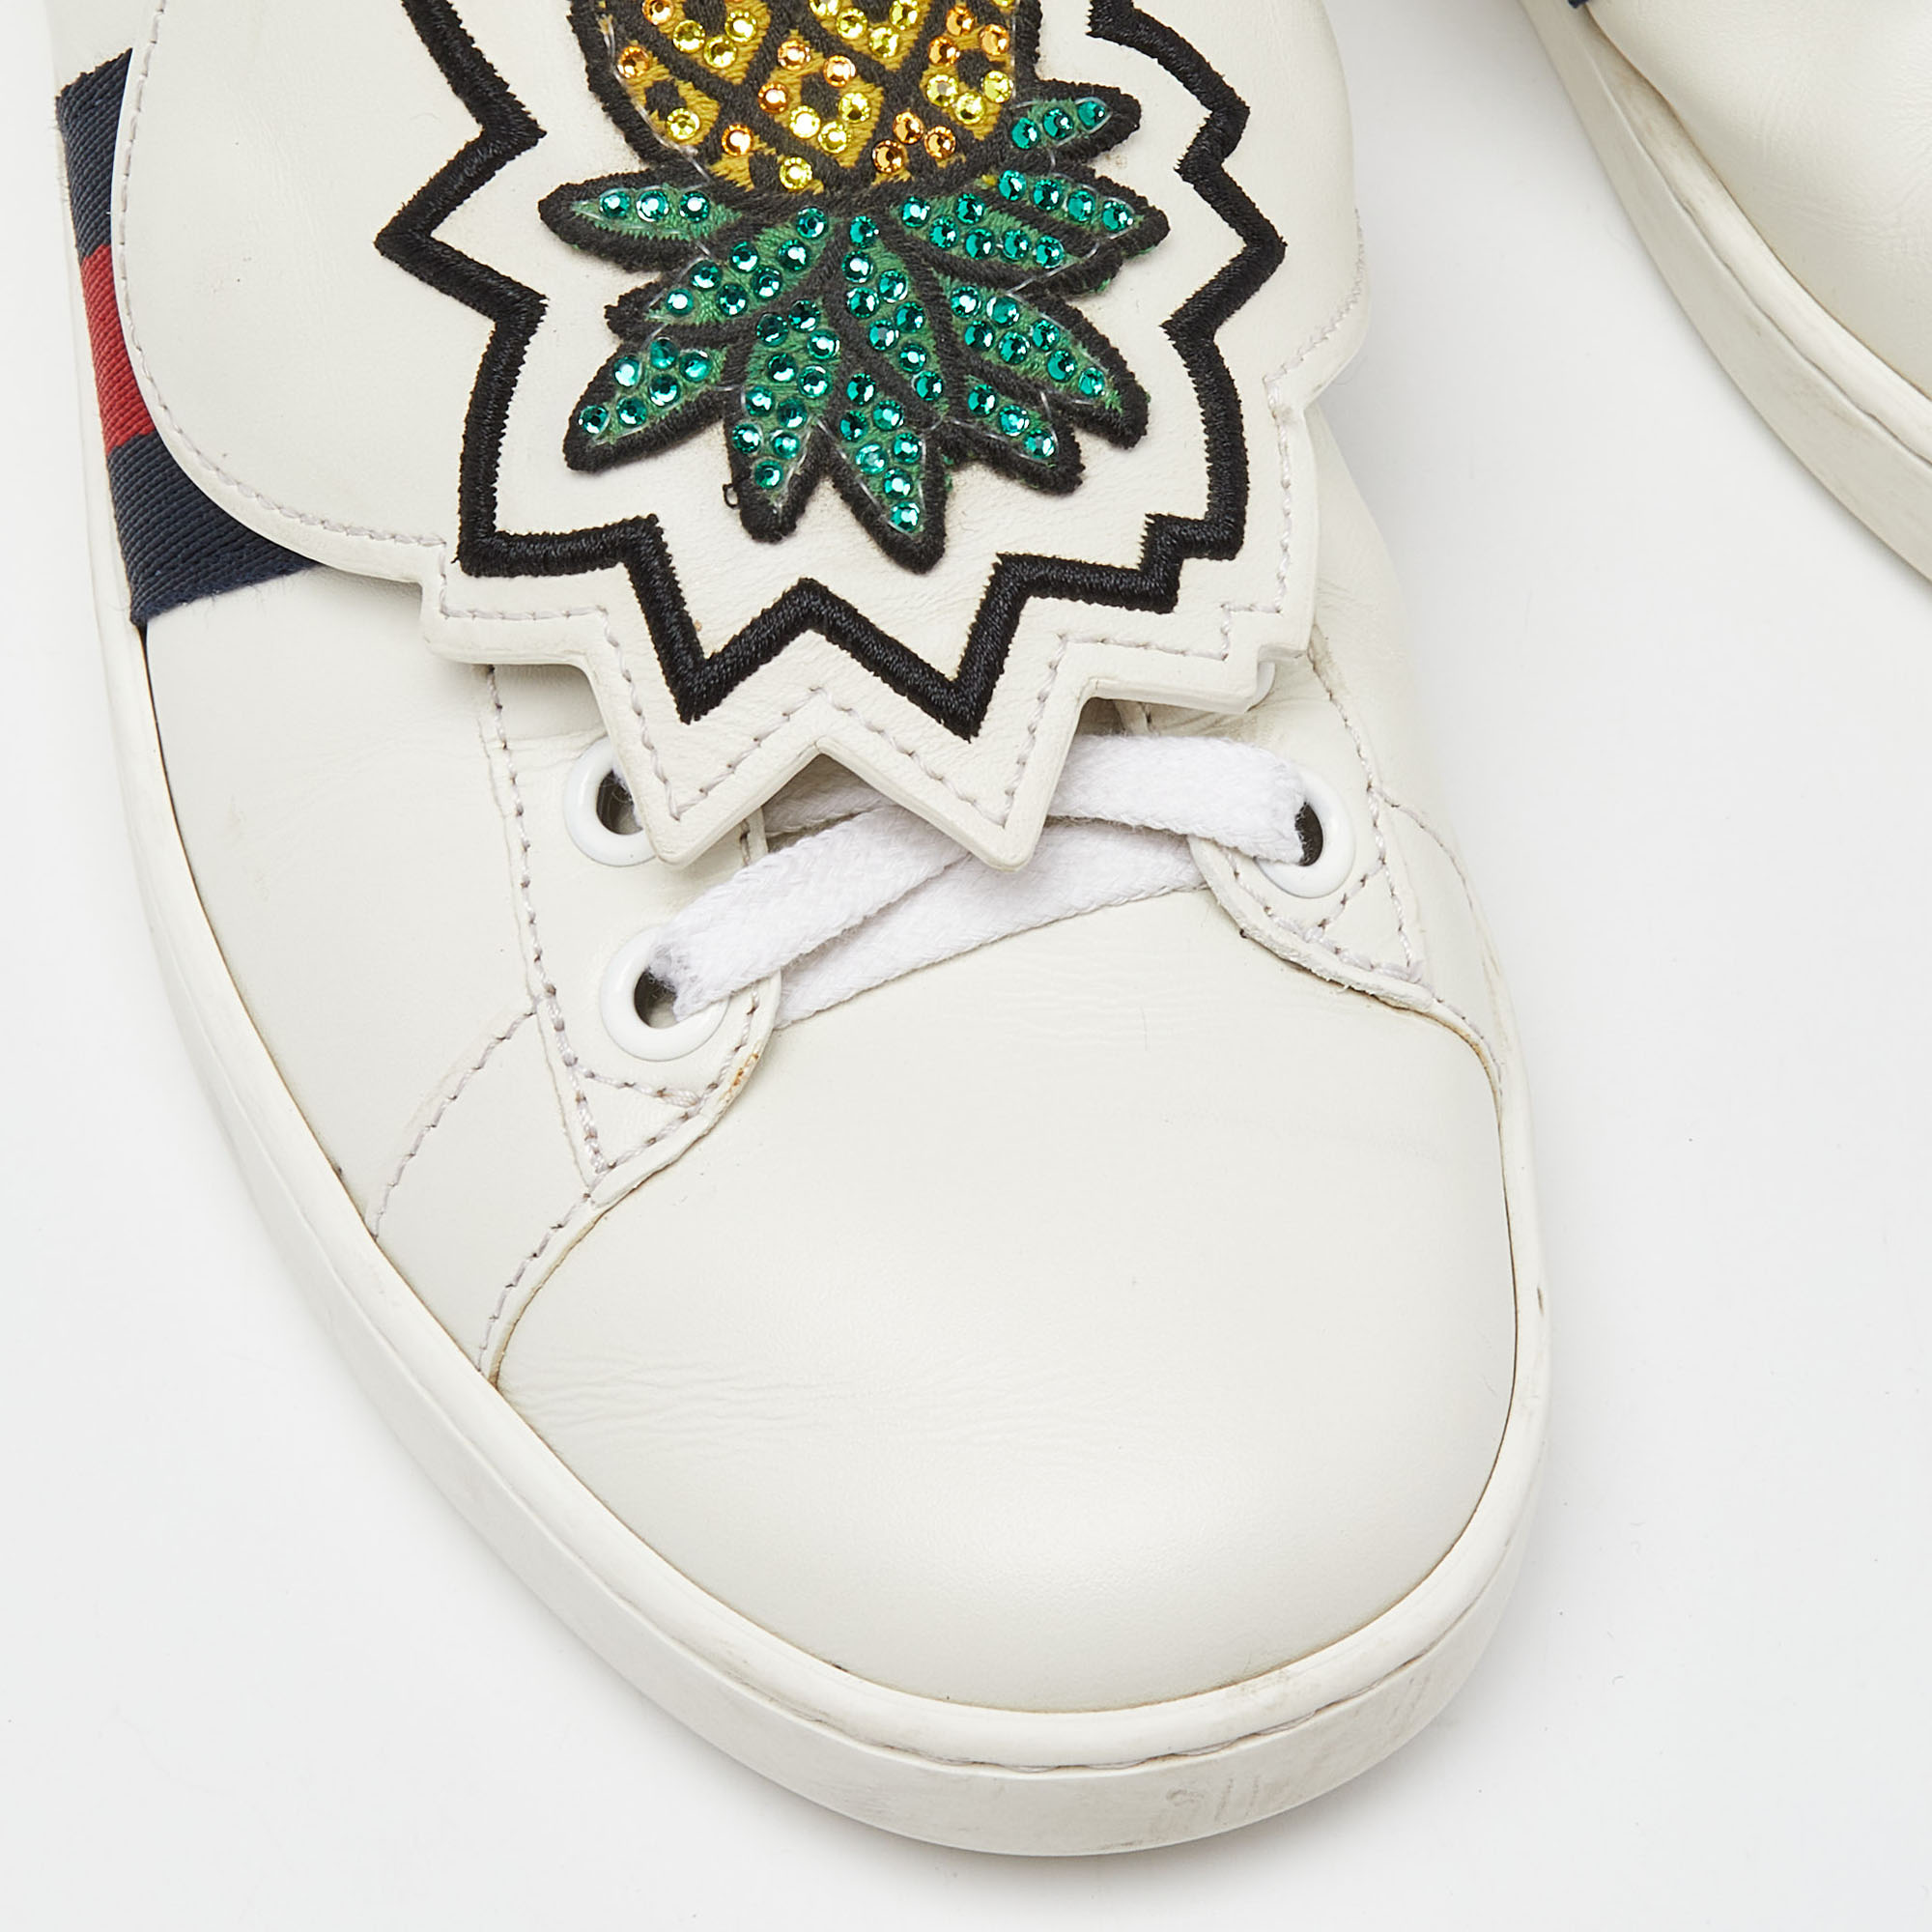 Gucci White Leather Embellished Pineapple Strap Ace Sneakers Size 35